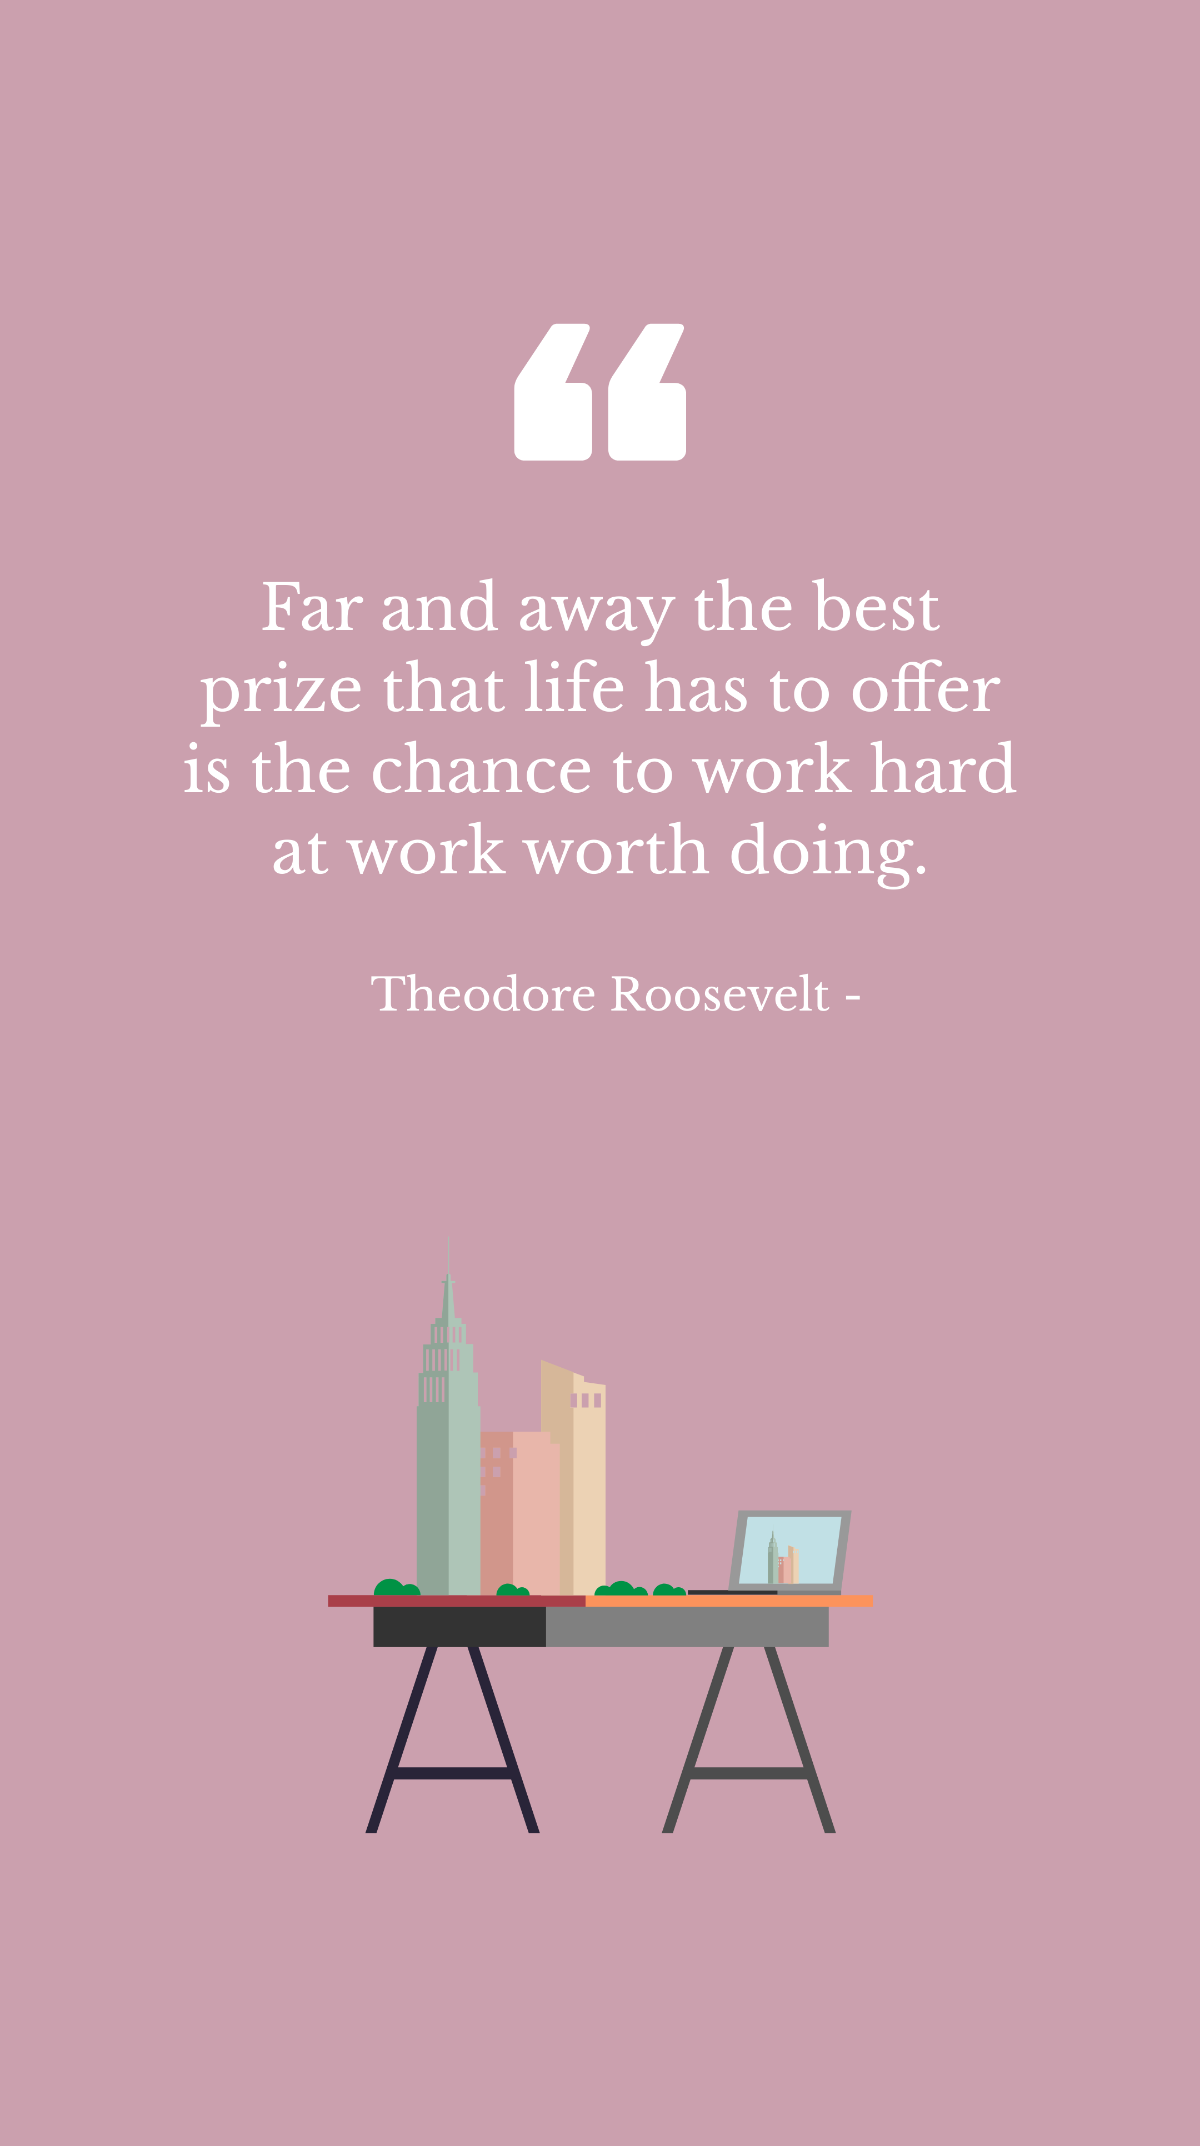 Theodore Roosevelt - Far and away the best prize that life has to offer is the chance to work hard at work worth doing. Template